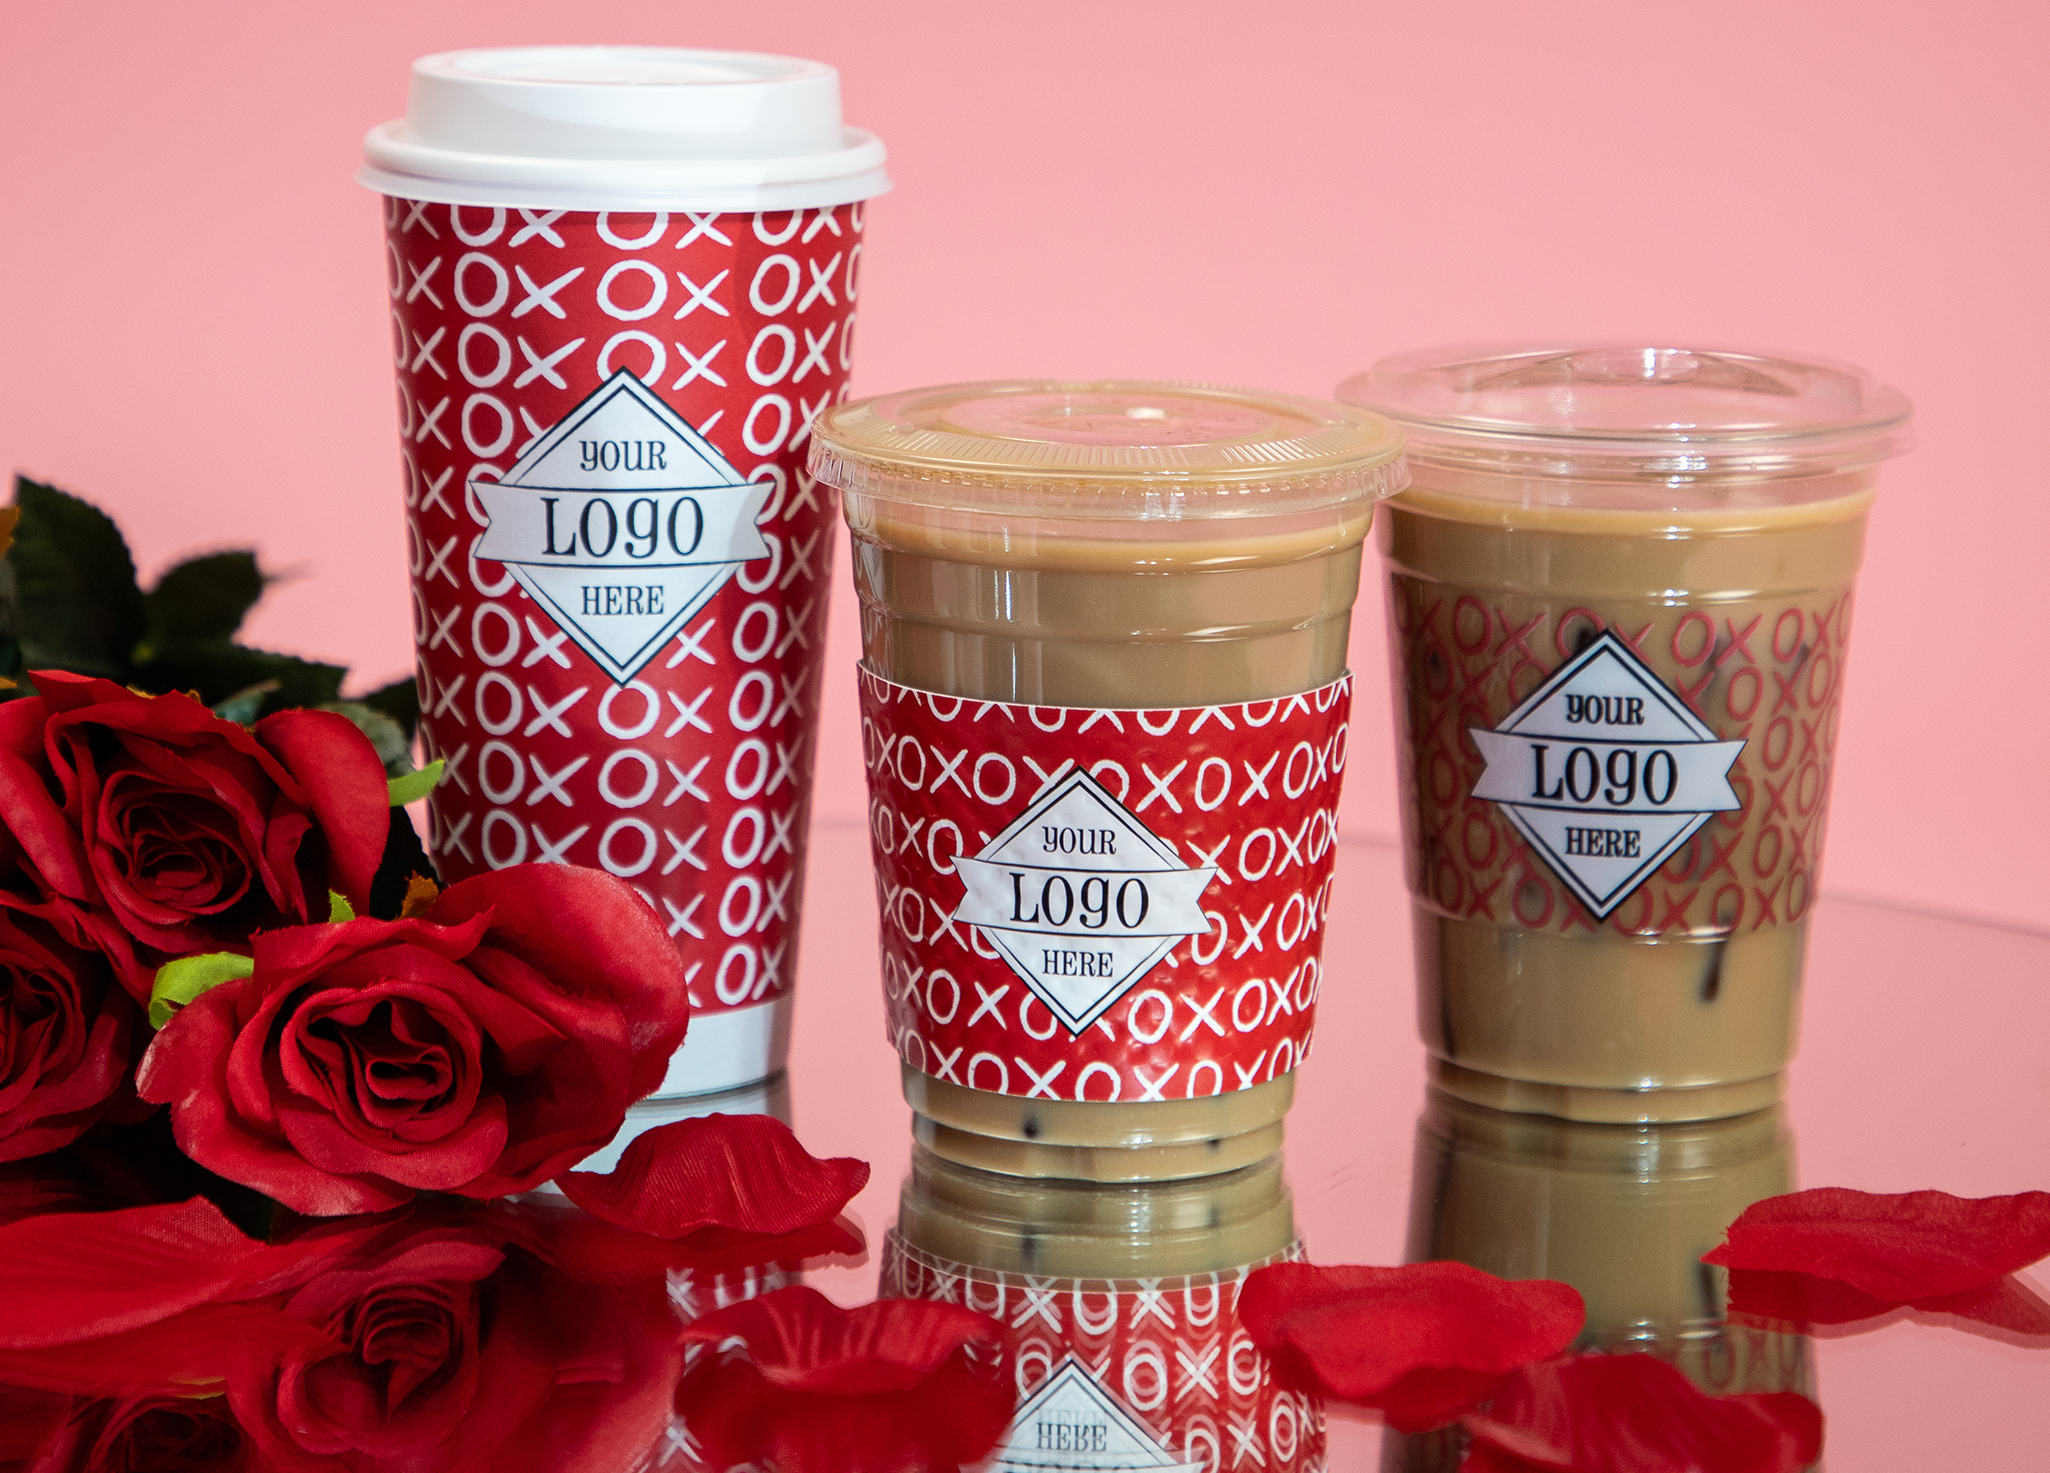 Valentine's Day themed cups on a mirror with rose petals and pink backdrop.